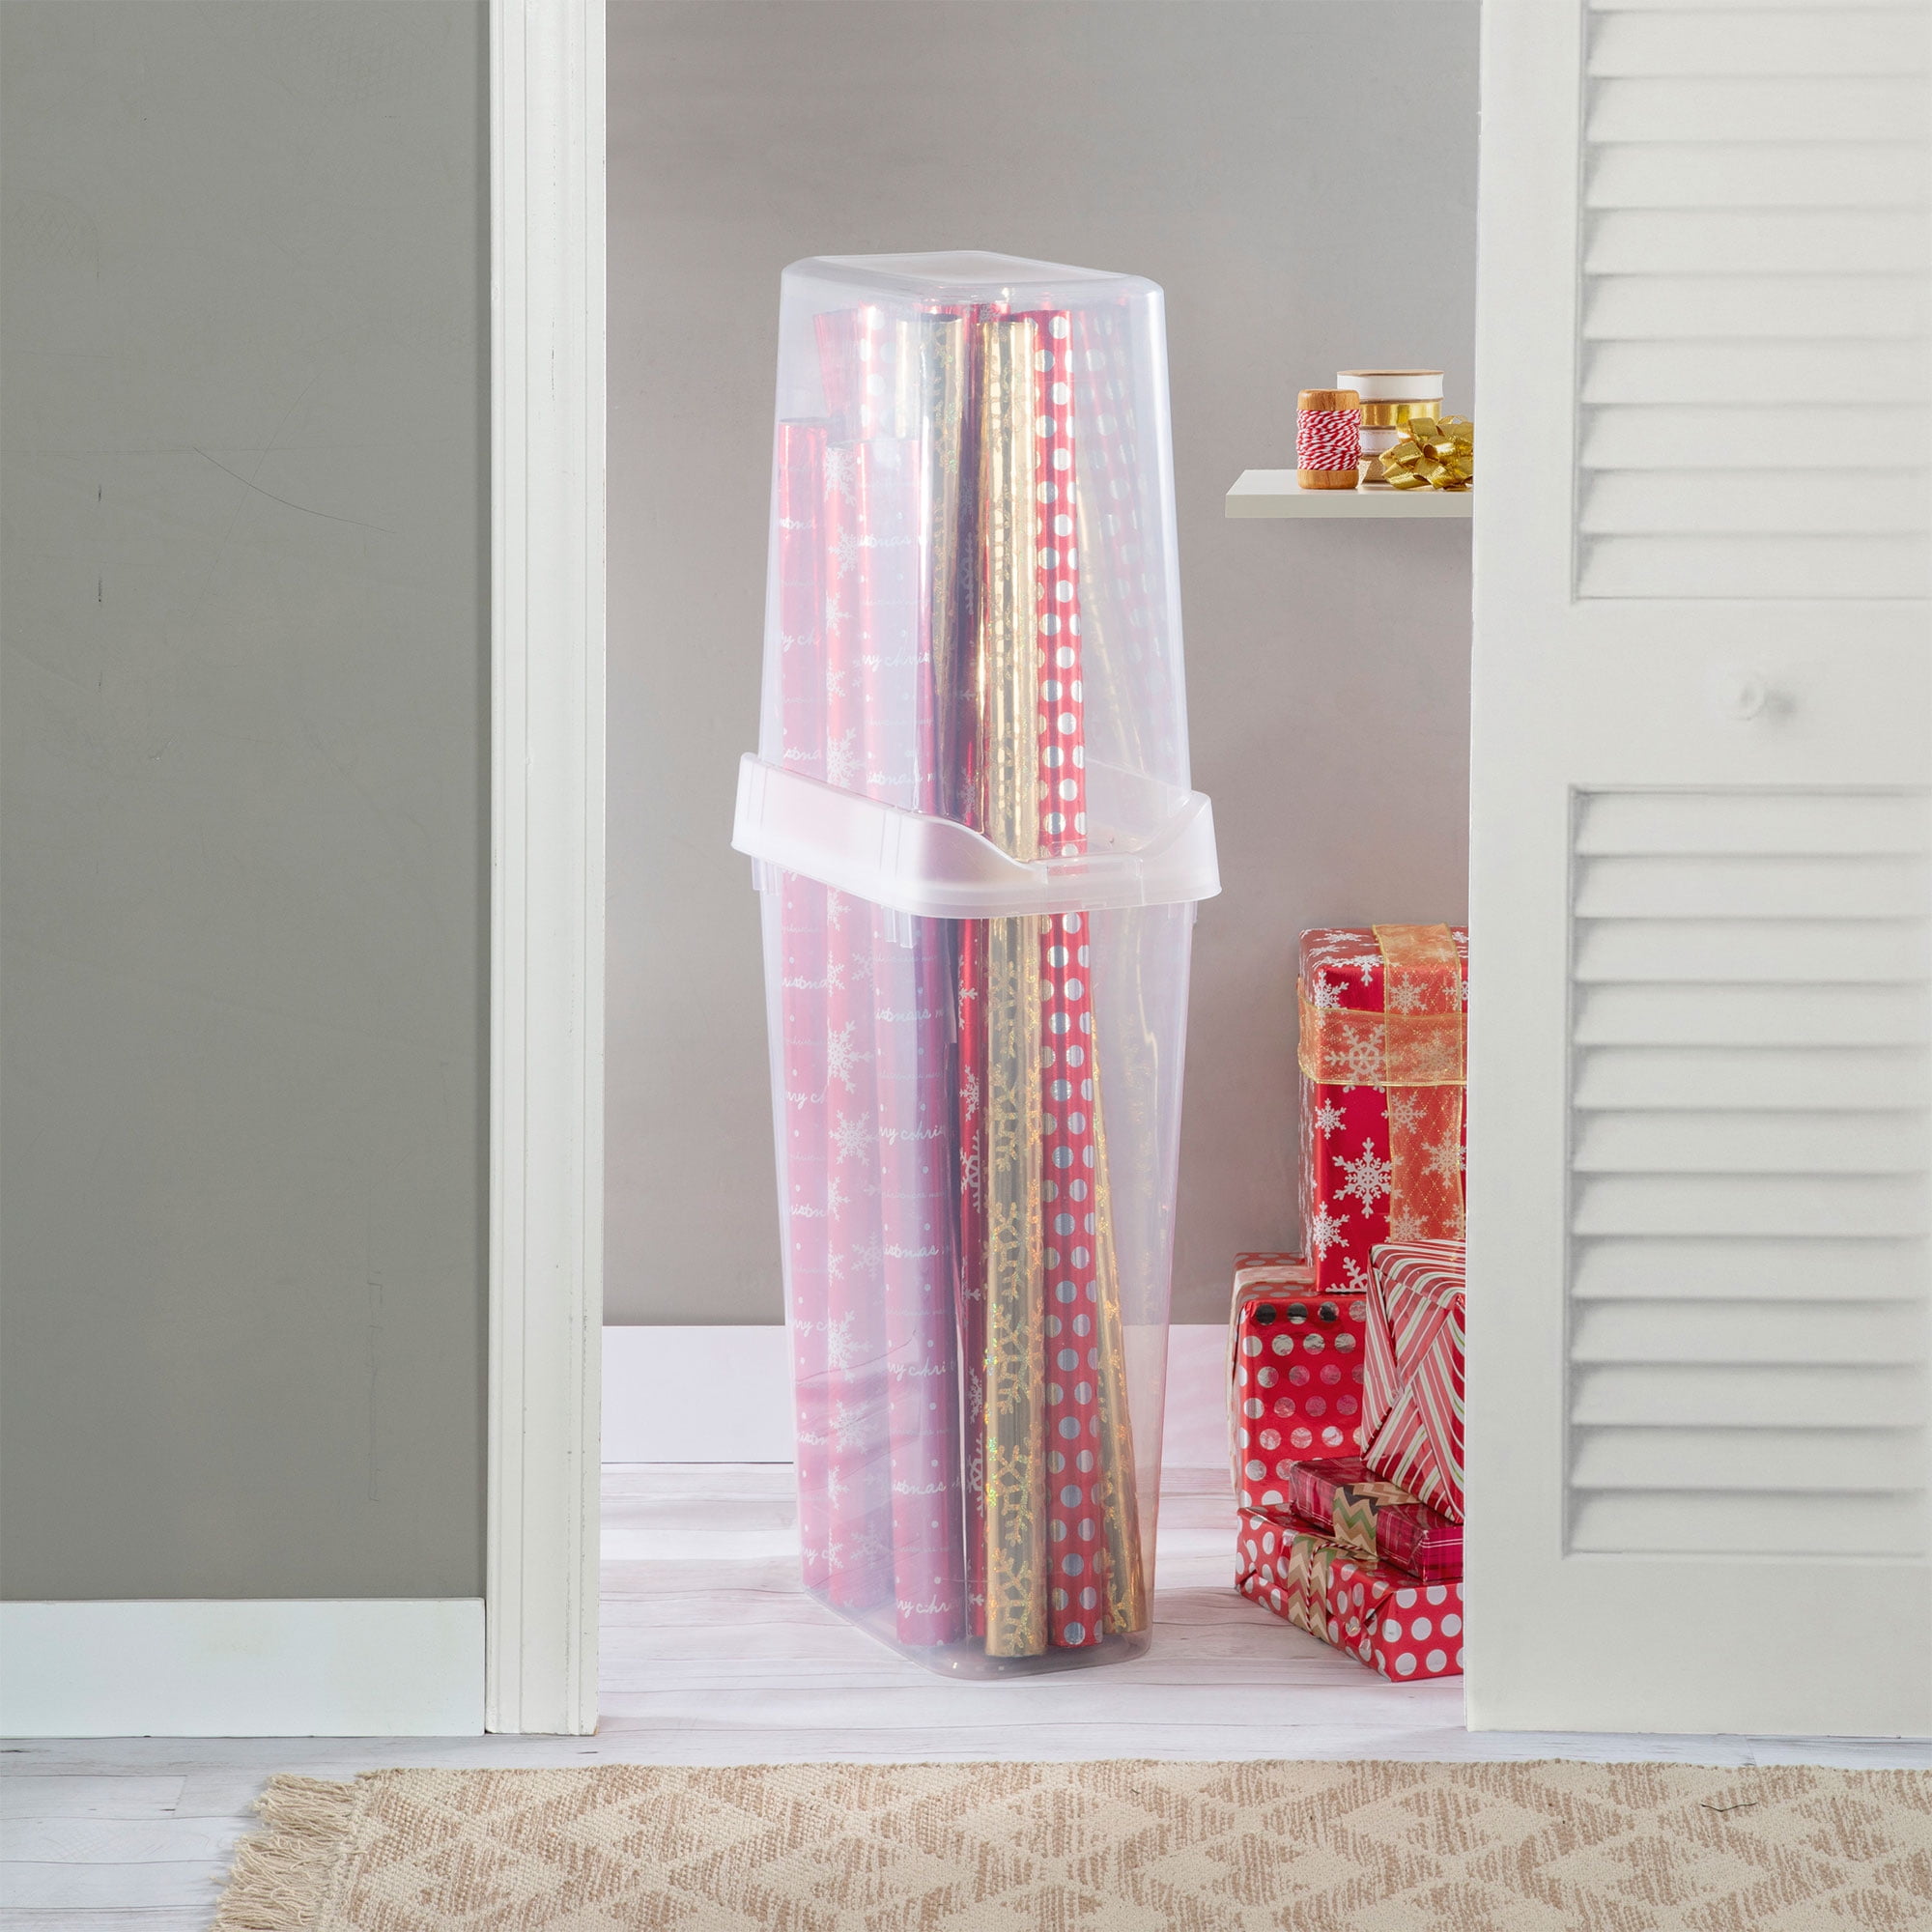 This Viral Storage Container for Wrapping Paper Is 40% on